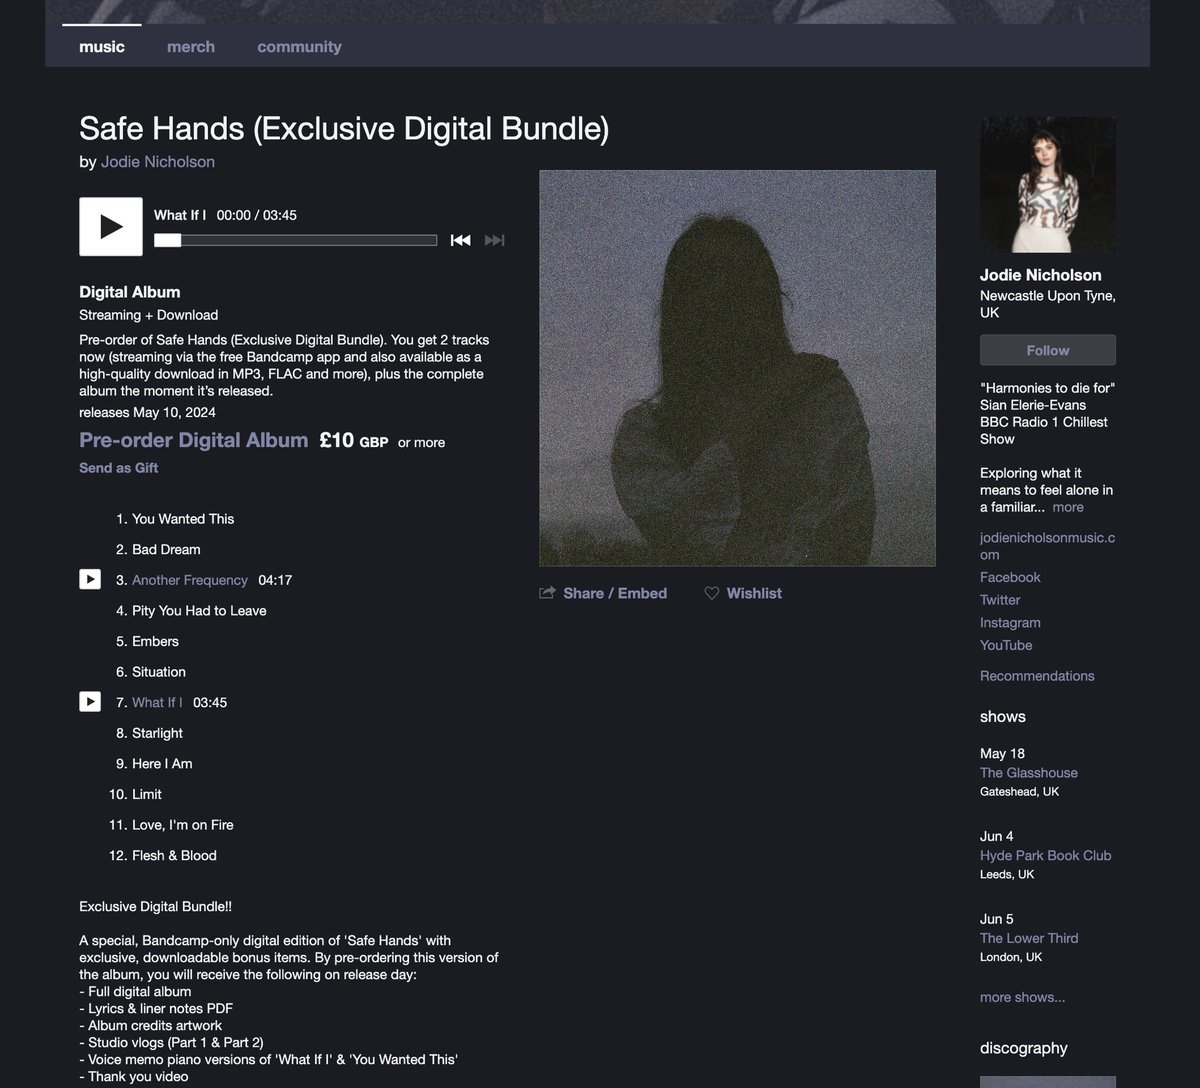 Happy #BandcampFriday!! To celebrate this month’s BF, I’ve launched a very special, digital bundle for my upcoming album ‘Safe Hands’, available only on Bandcamp! It includes vlogs, lyrics & voice memos to bring you closer to the music 🥹 Pre-order now: jodienicholson.bandcamp.com/album/safe-han…